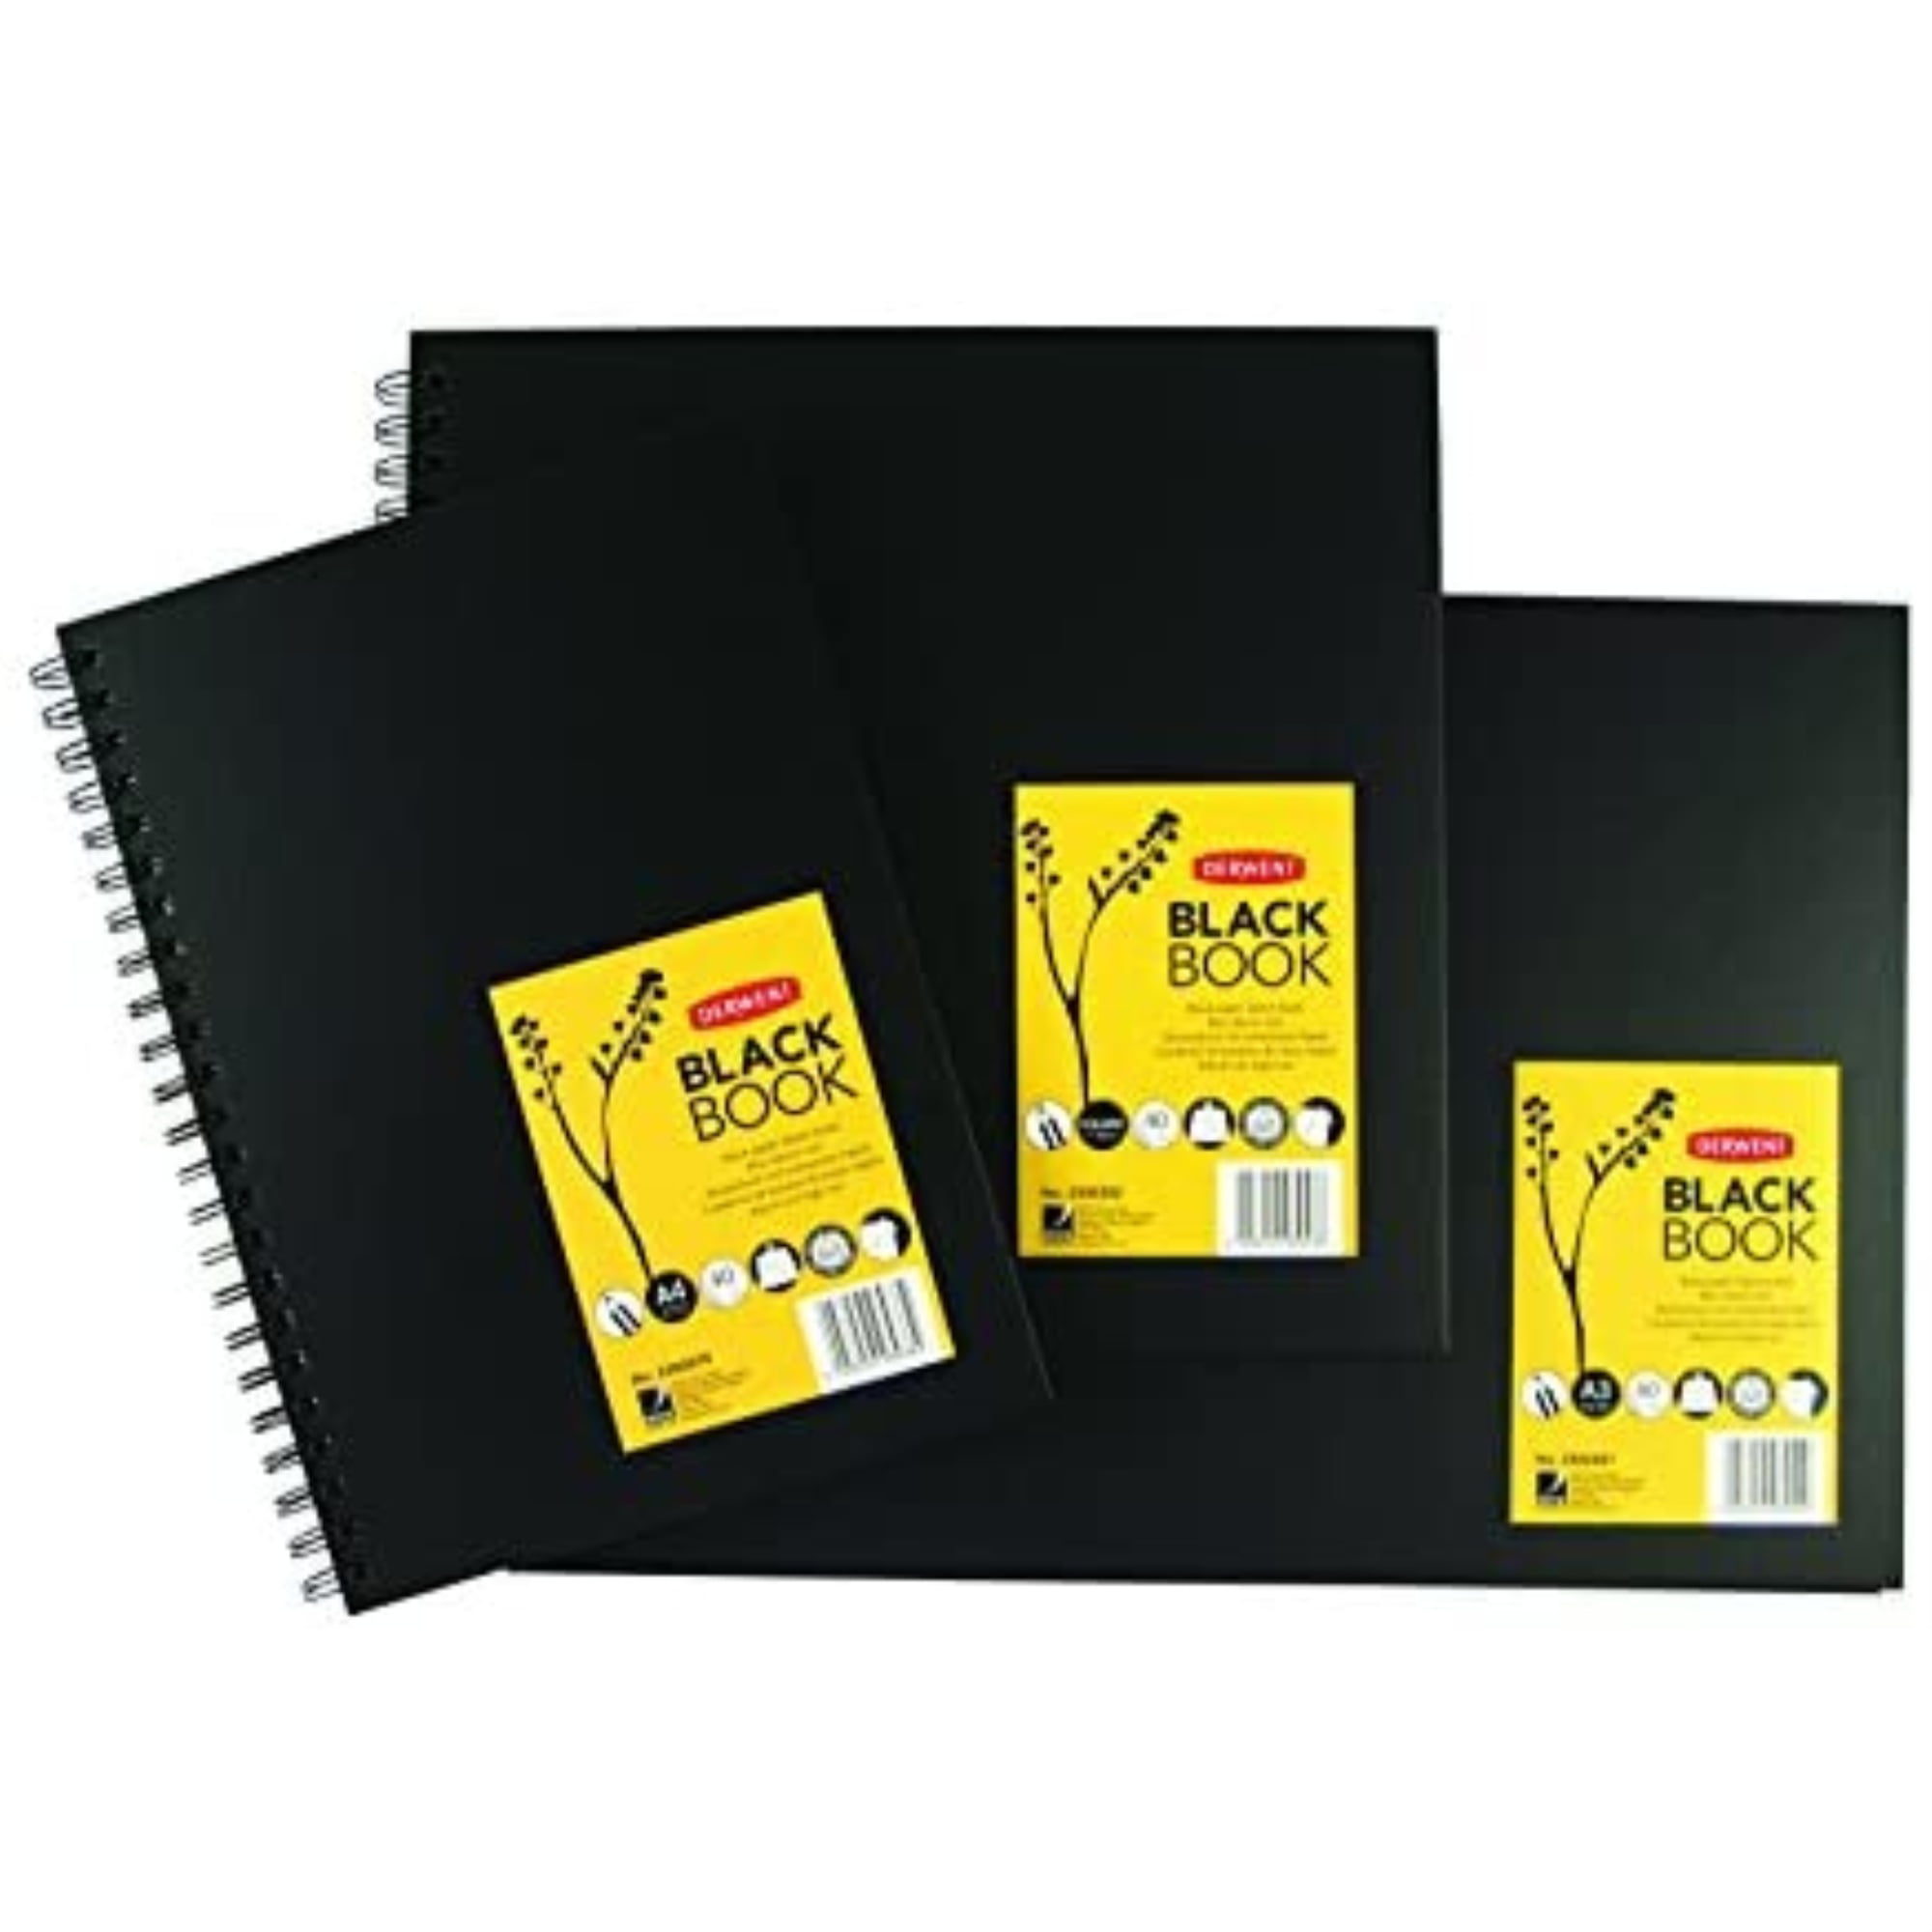  Derwent Sketch Book, Big Book Drawing Pad, A5, 5.83 x 8.27  Inches Sheet Size, Wirebound, Hard Covers, 86 Sheets (2301608) , Black :  Arts, Crafts & Sewing